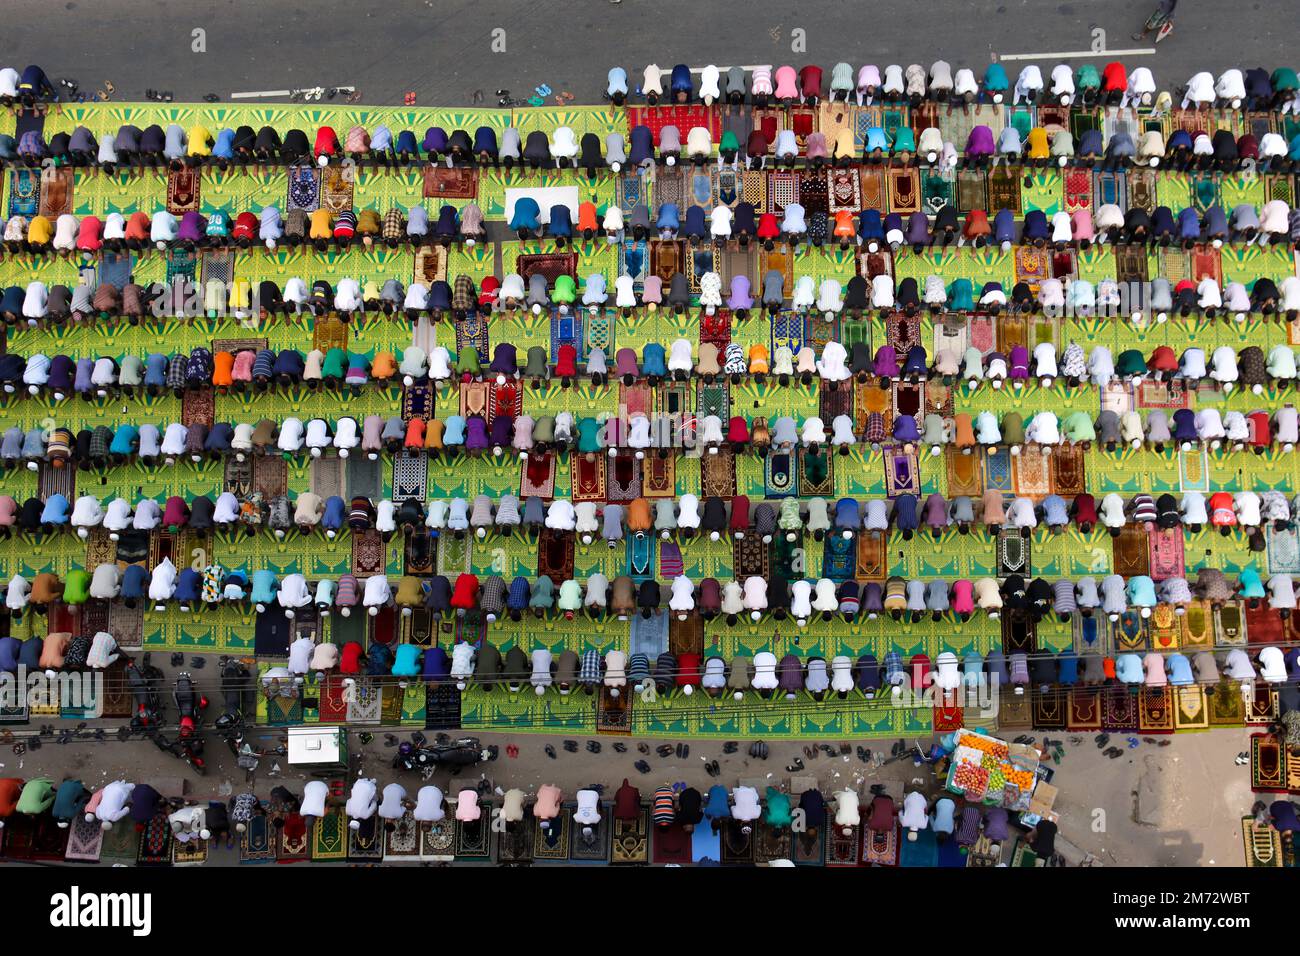 Friday prayer is very important for Muslims. In a famous mosque in Dhaka, the capital of Bangladesh, There are a lot of people prayers like this. Stock Photo